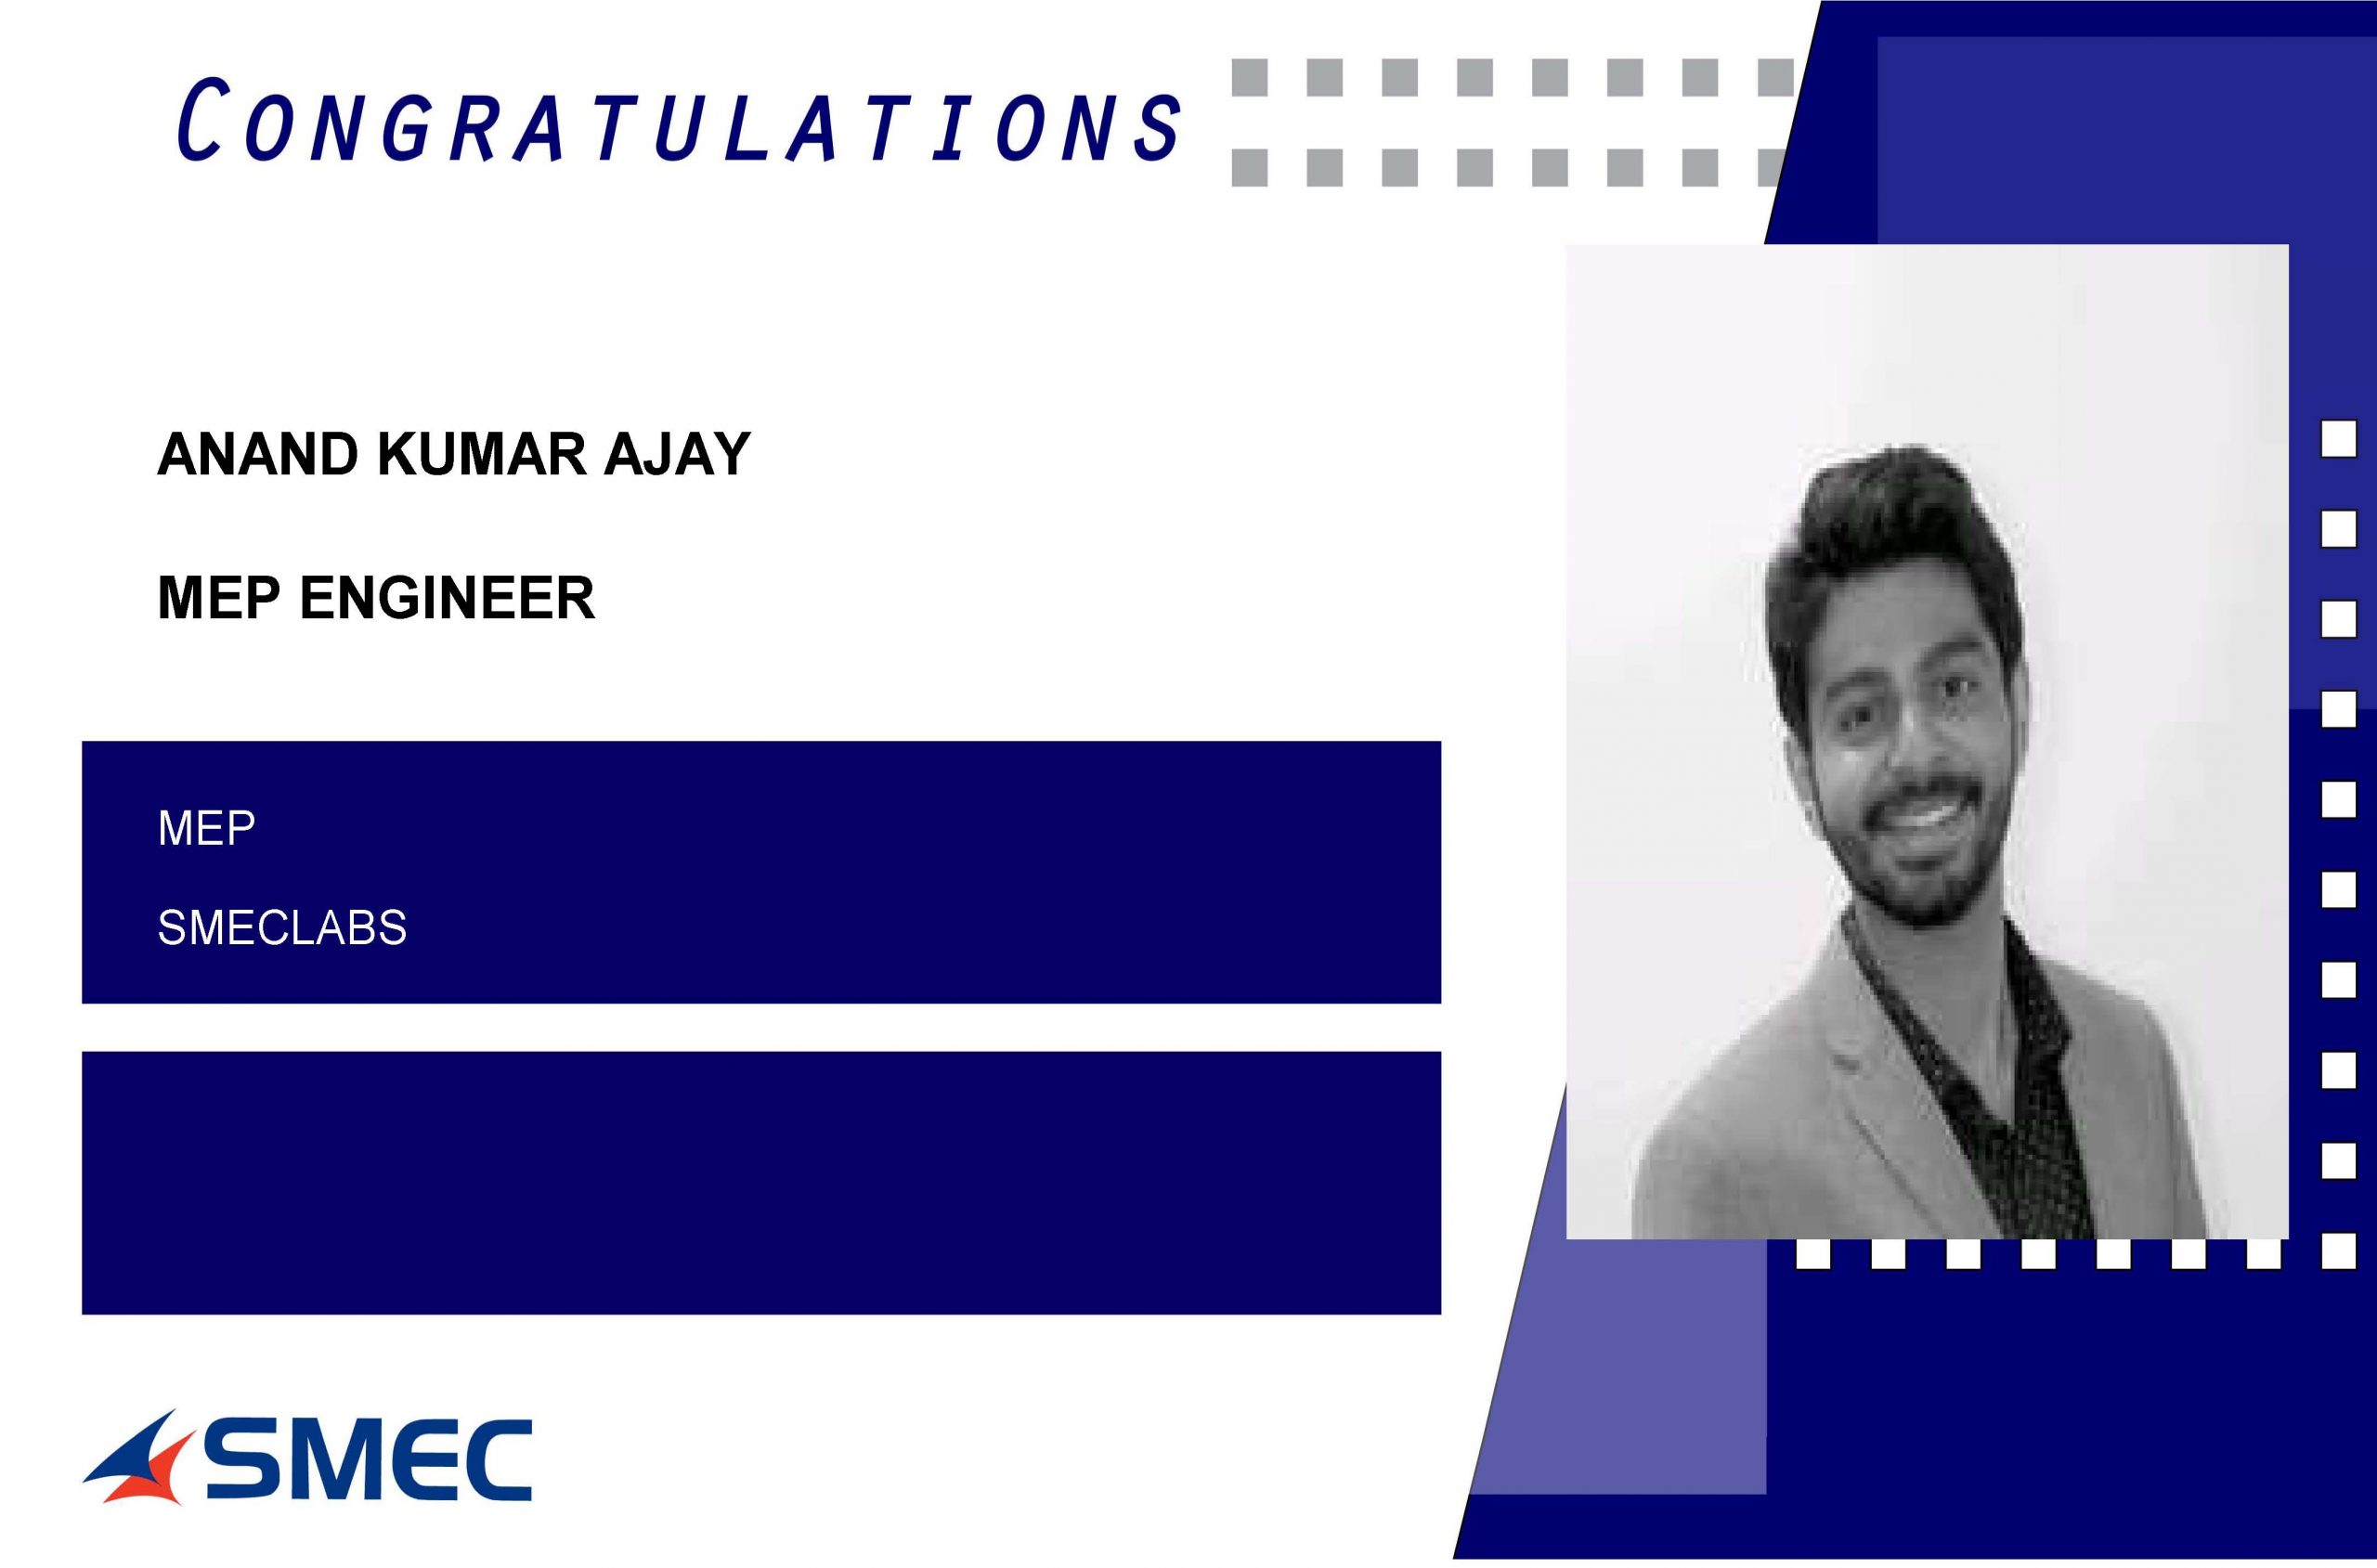 Anand Kumar Ajay Placed Successfully as MEP Engineer